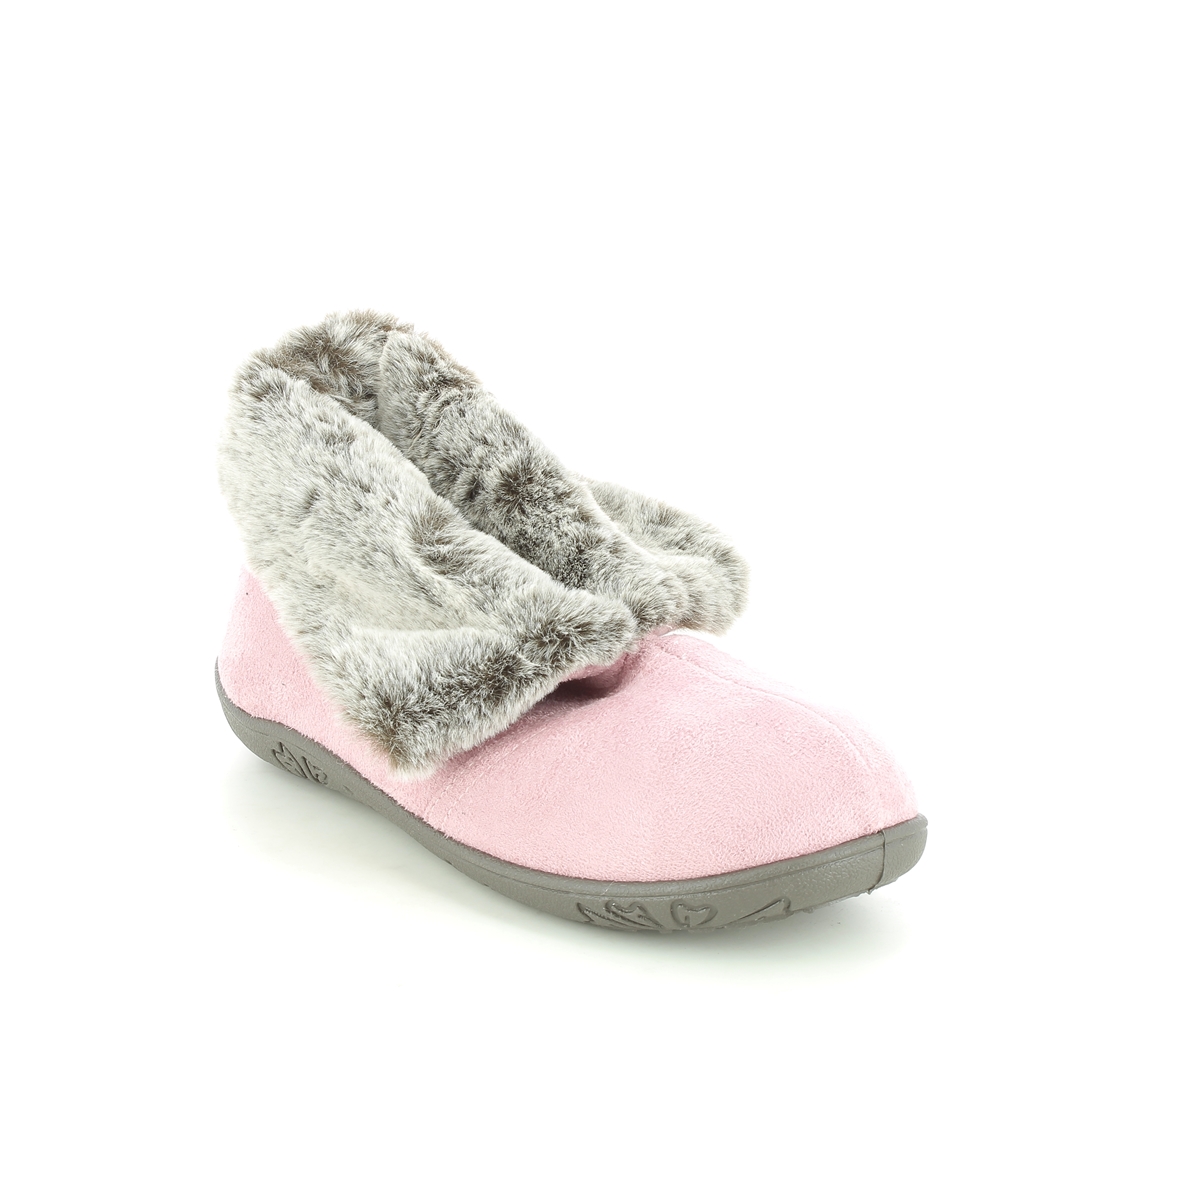 Padders Esme  Ee Fit Pink Womens slippers 4050-6107 in a Plain Textile in Size 5